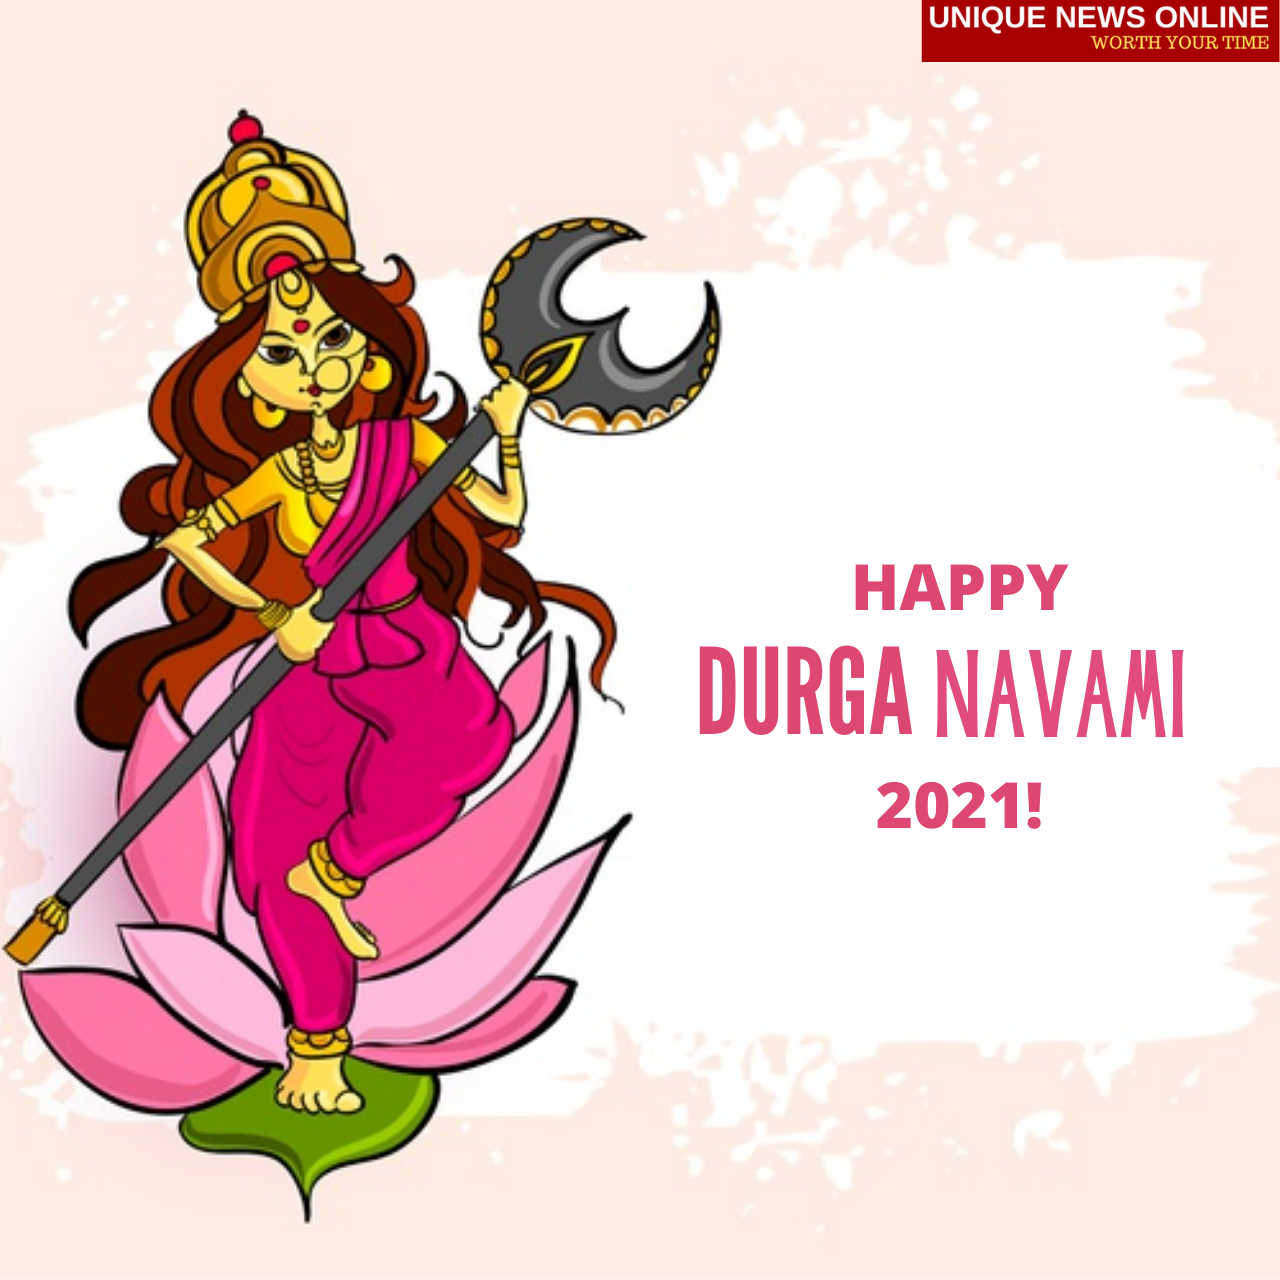 Happy Durga Navami 2021 Wishes, Messages, Greetings, Quotes, and Images to  share on Maha Navami